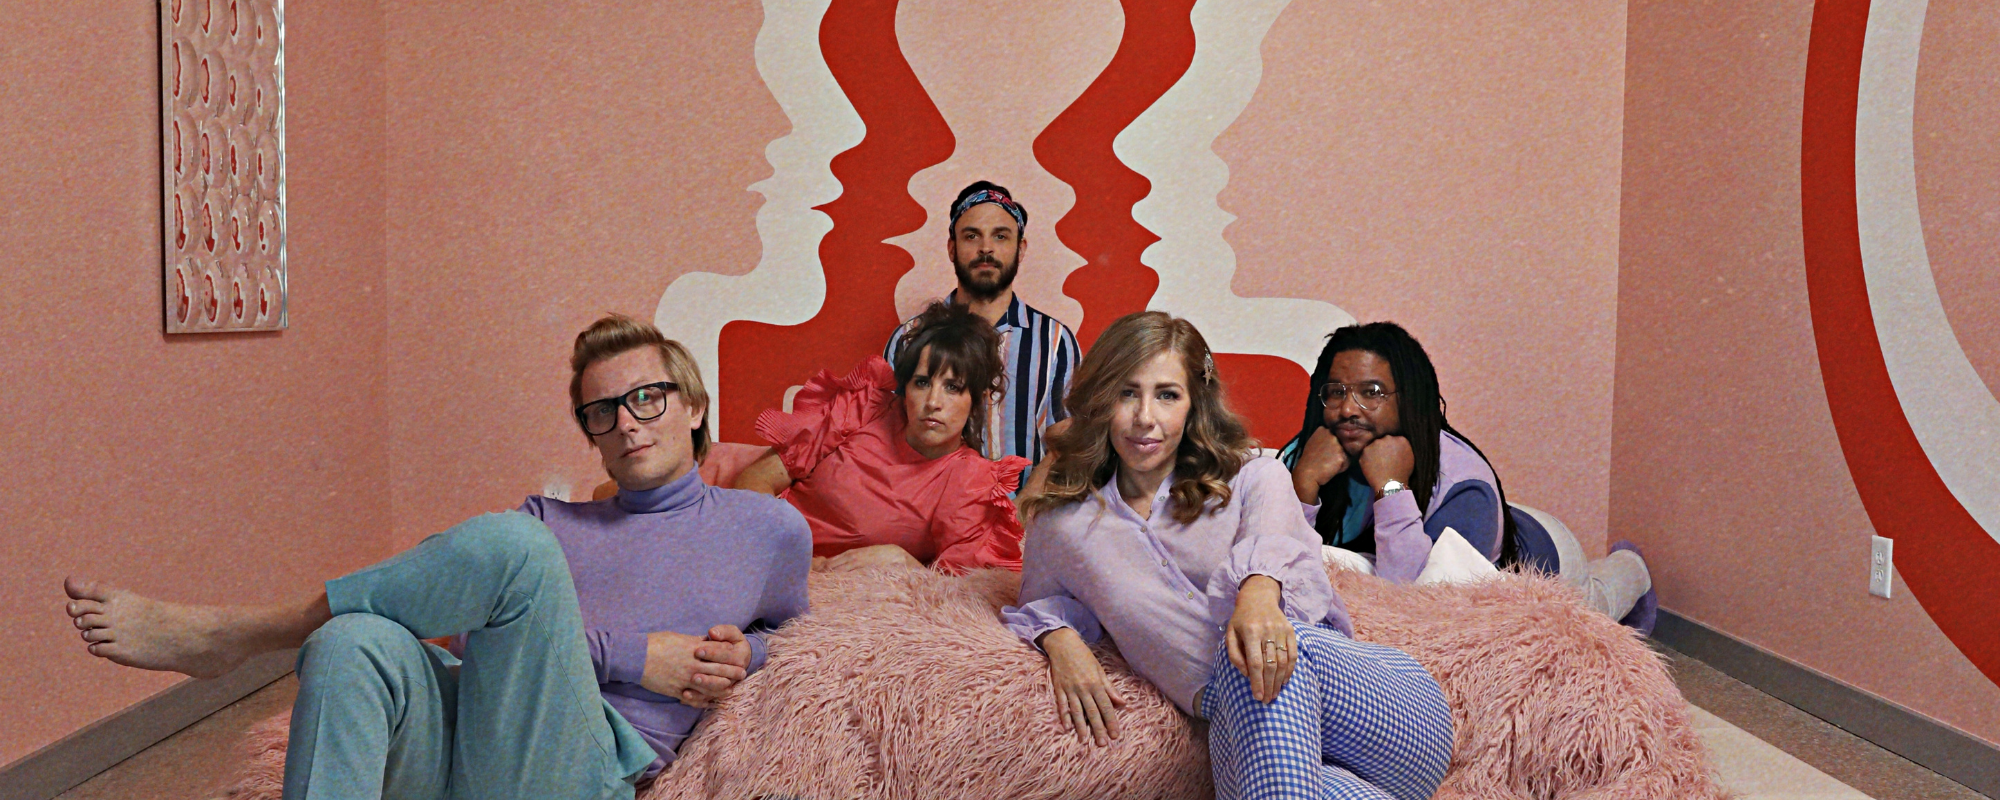 Lake Street Dive Performs New Album ‘Obviously’ Live for the First Time at Moon Crush Festival